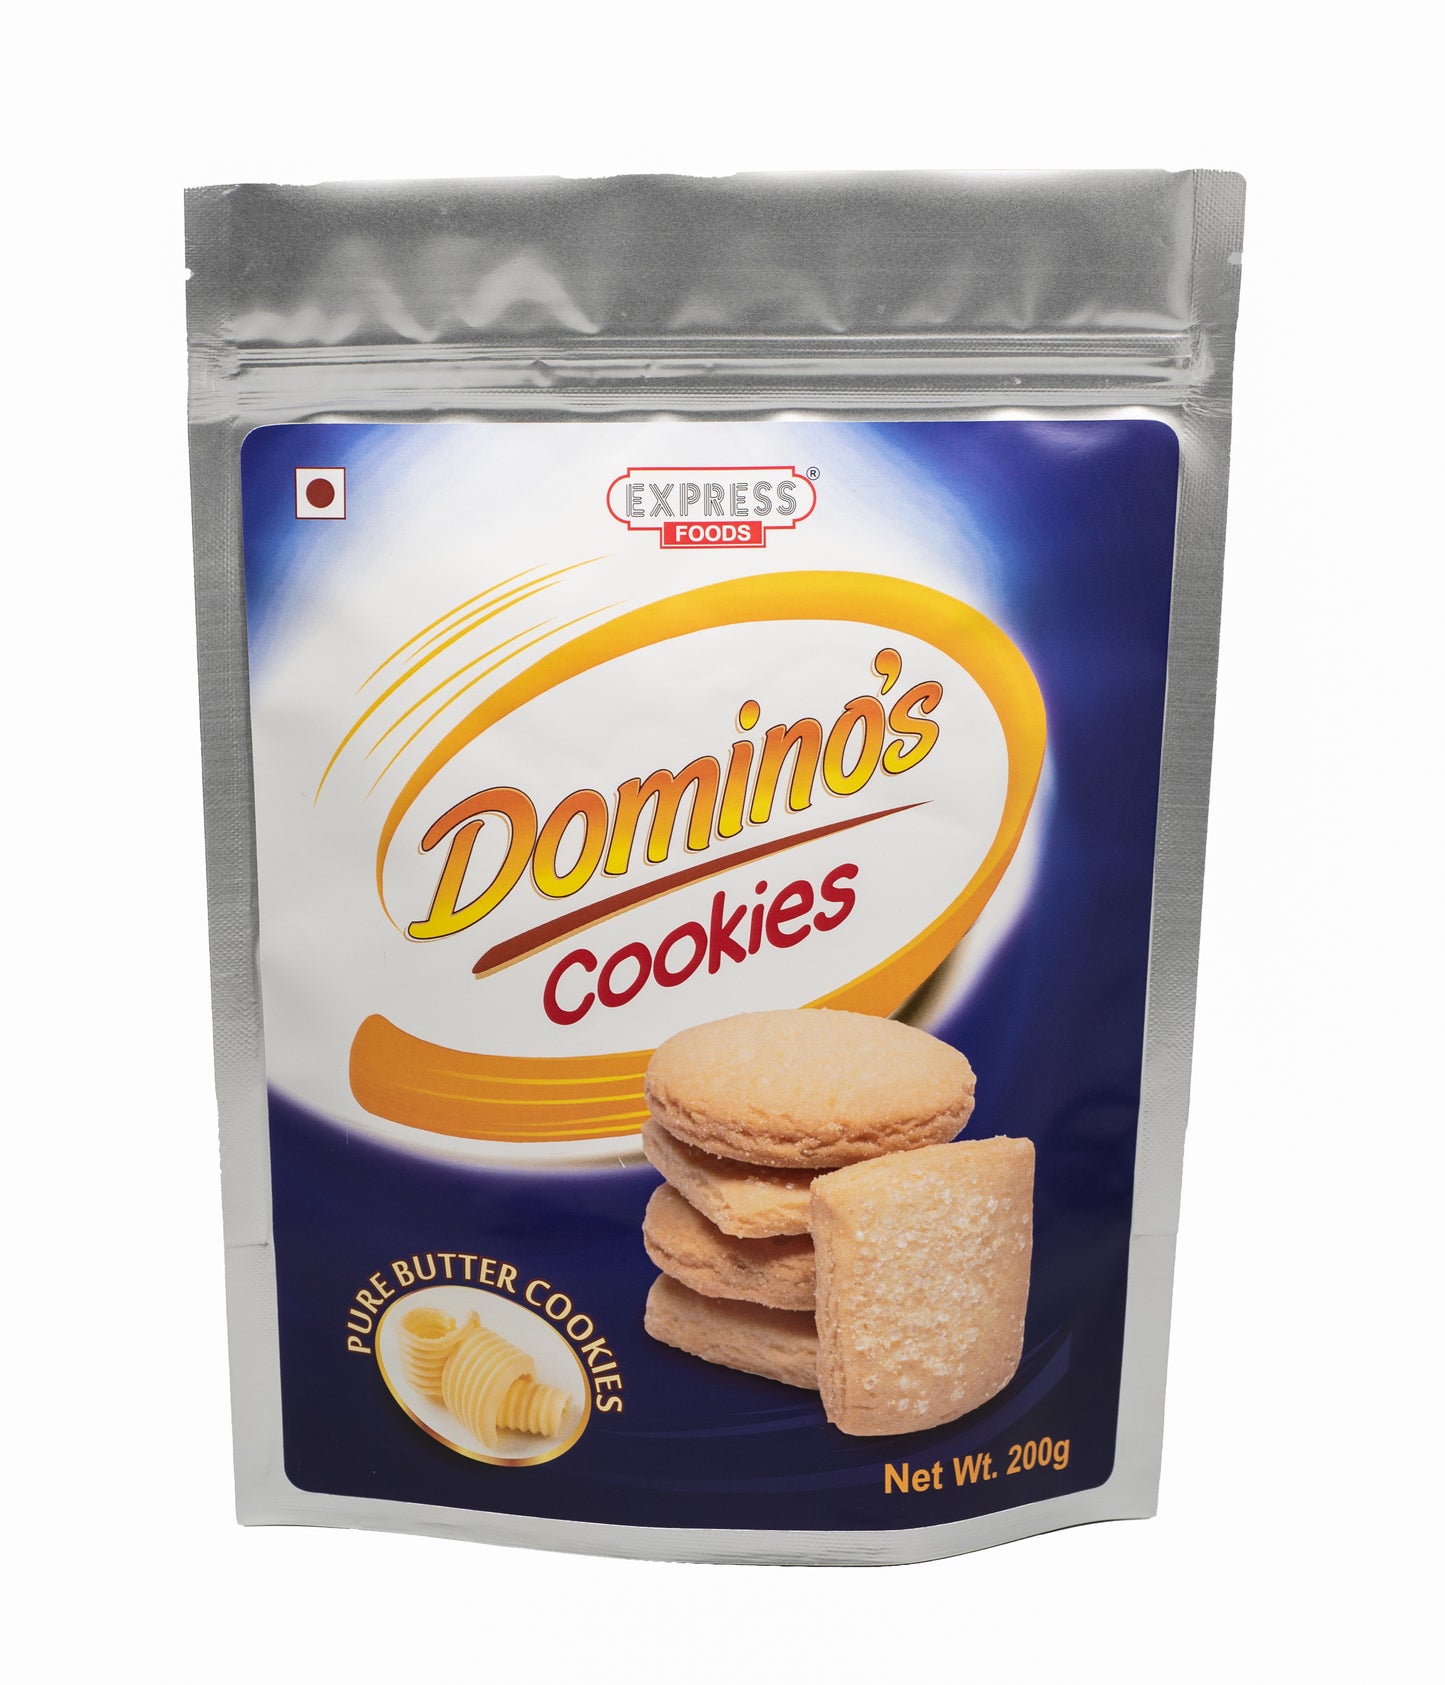 Domino's Pure Butter Cookies